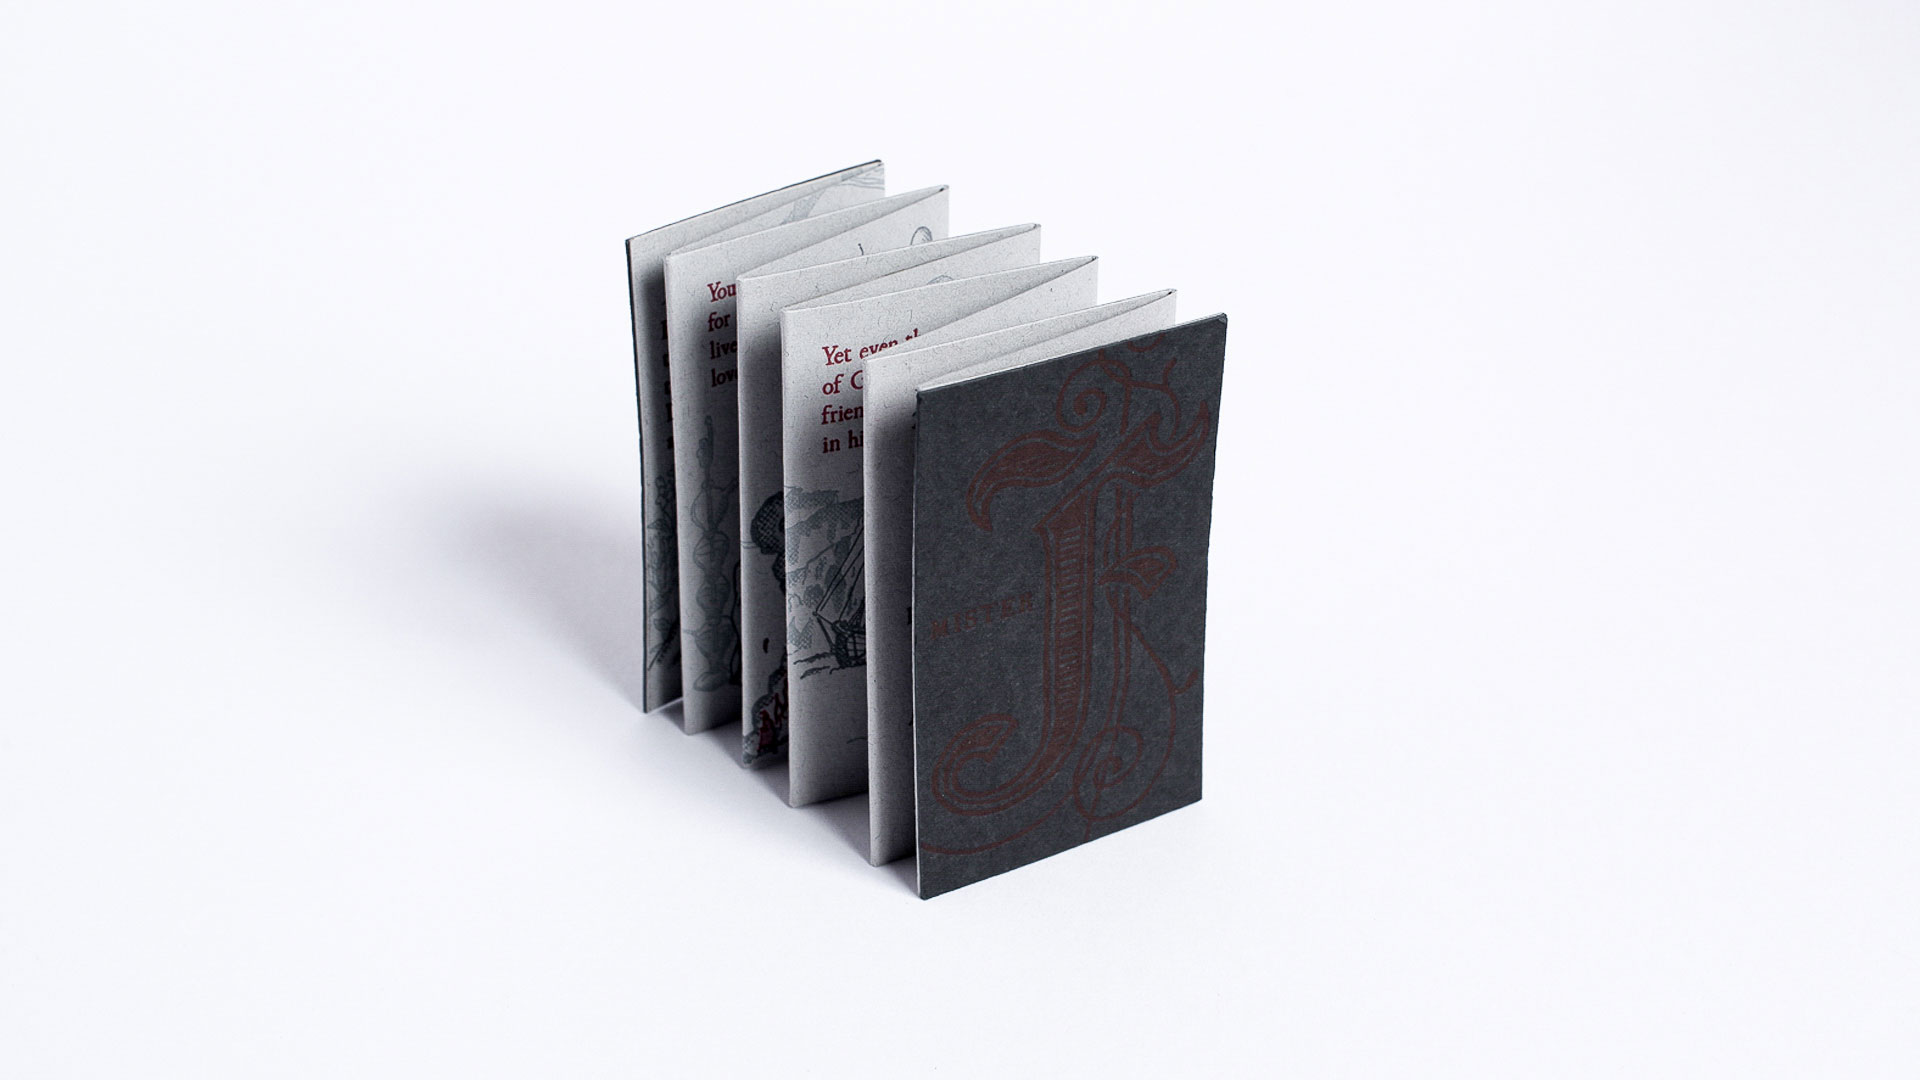 Scary ‘Mister F’ Letterpress Book - PaperSpecs